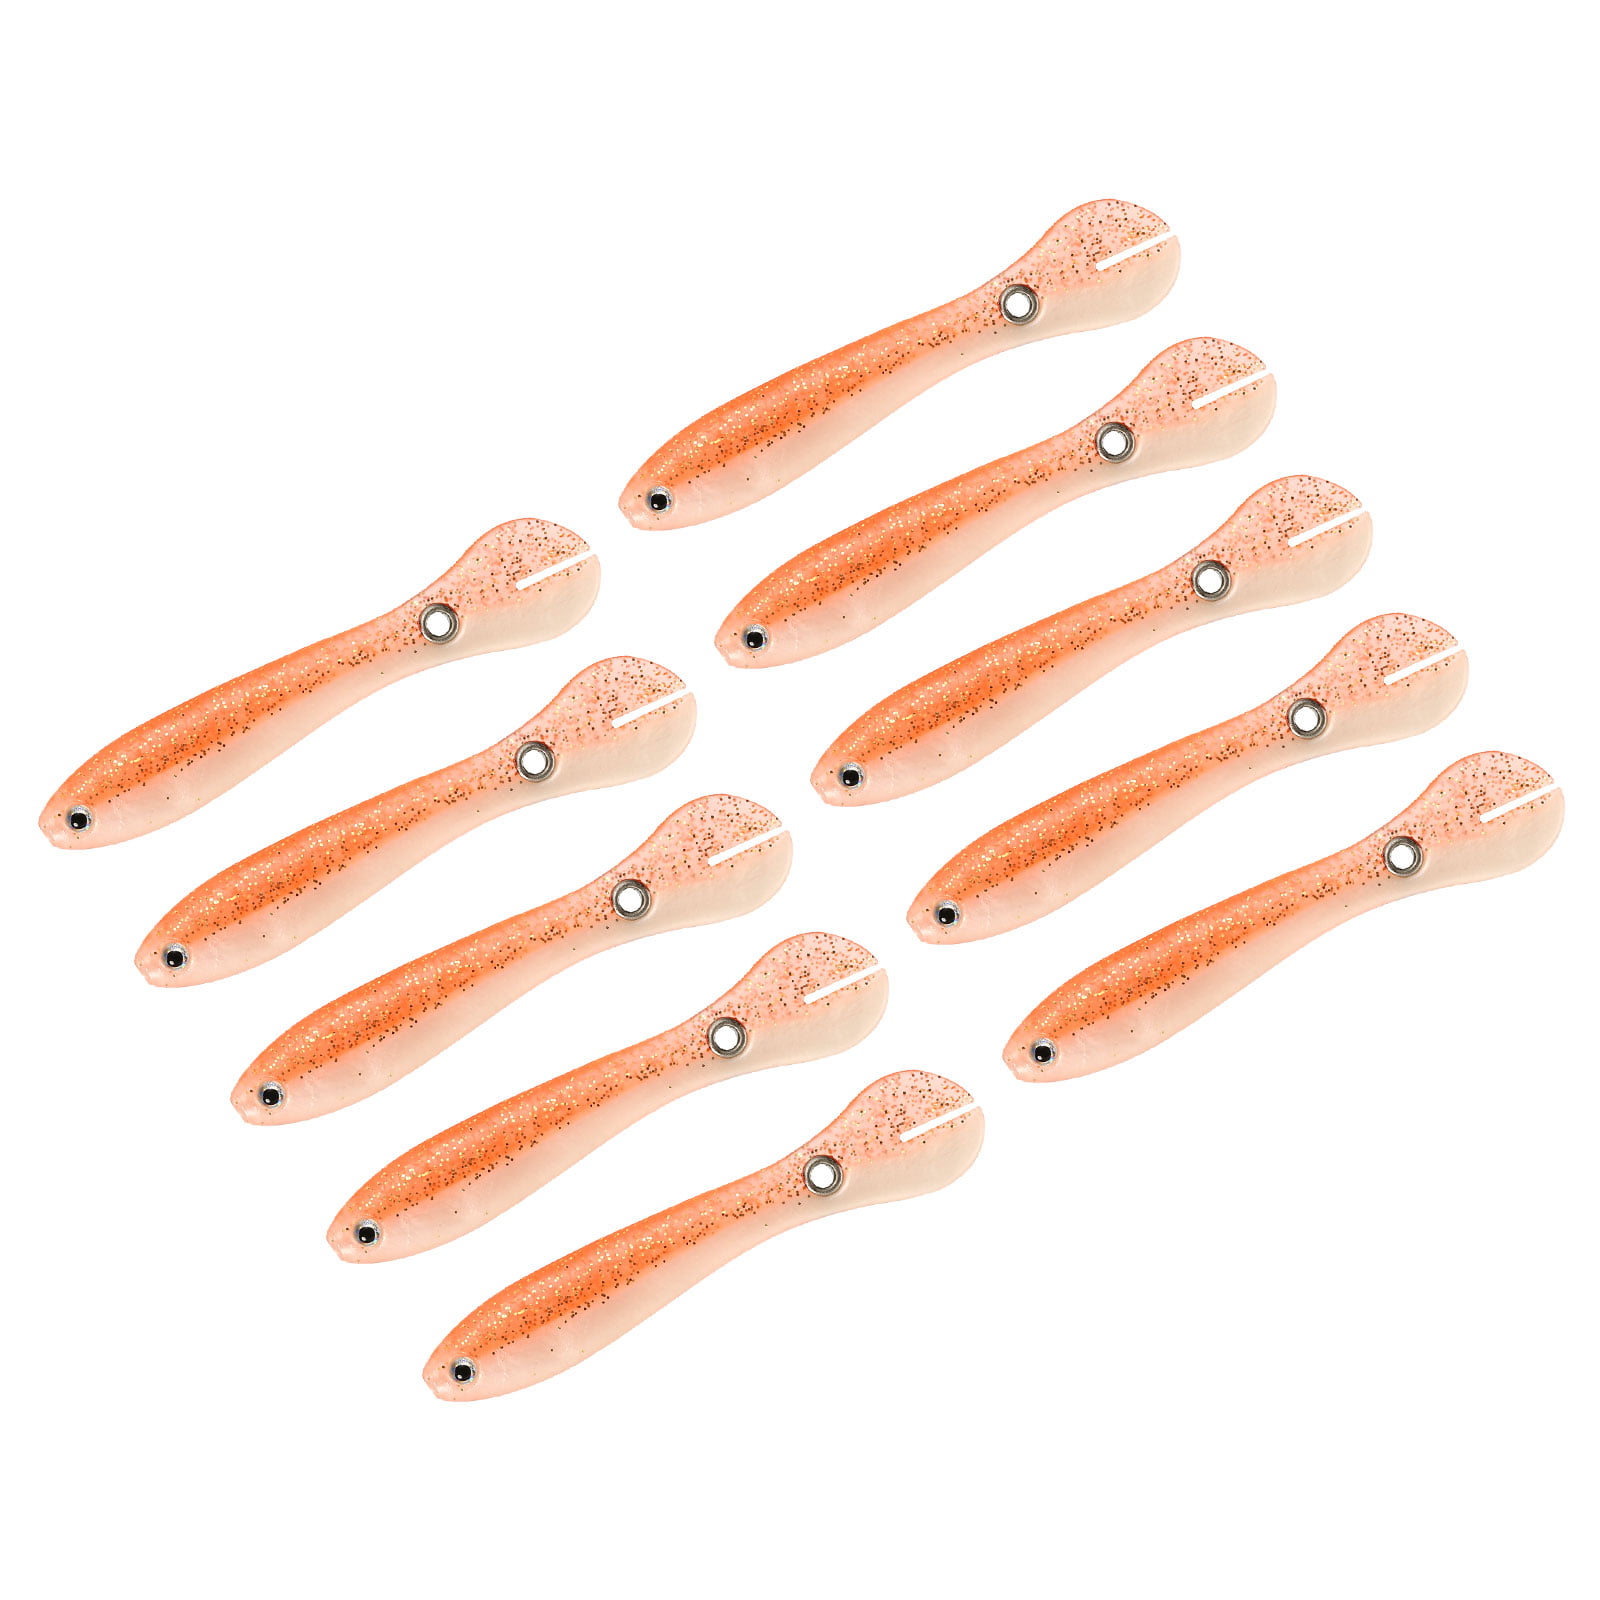 Fishing Lures, Minnow Popper Crank Baits Pencil Bass Trout Fishing Lures  with Hooks, Topwater Artificial Hard Swimbaits for Saltwater Freshwater  Trout Walleye Blueback Salmon Catfish B-5pc,3.94,0.63oz